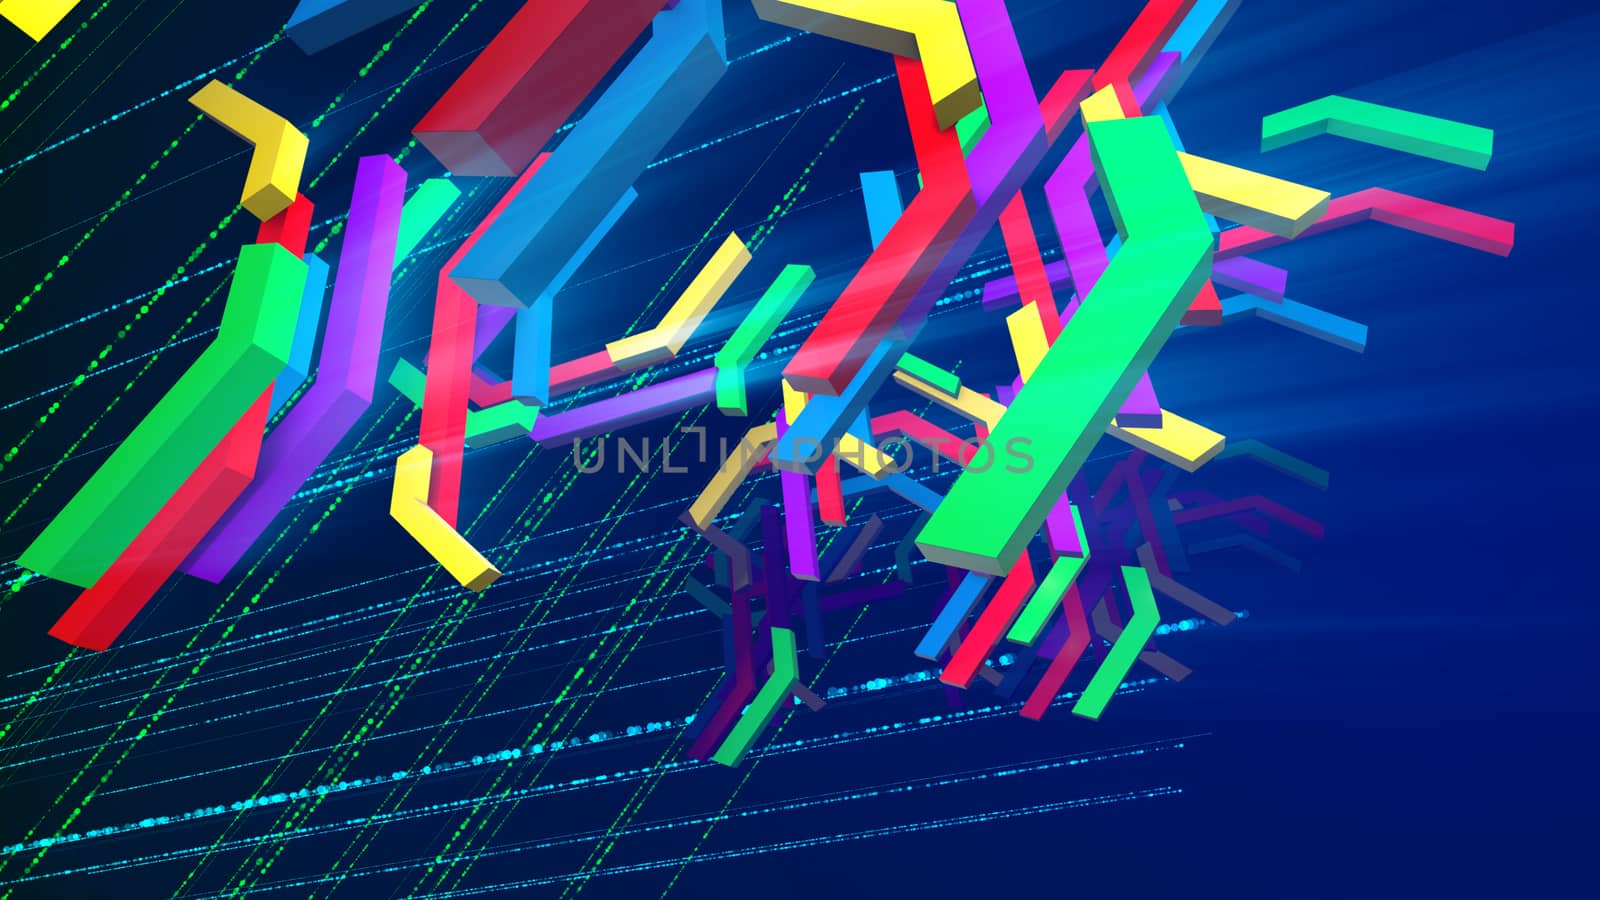 Splendid 3d illustration of soaring down multicolored technical bars having zigzag and crisscross shapes in the dark violet background with a hexagonal network. They look optimistic and childish.